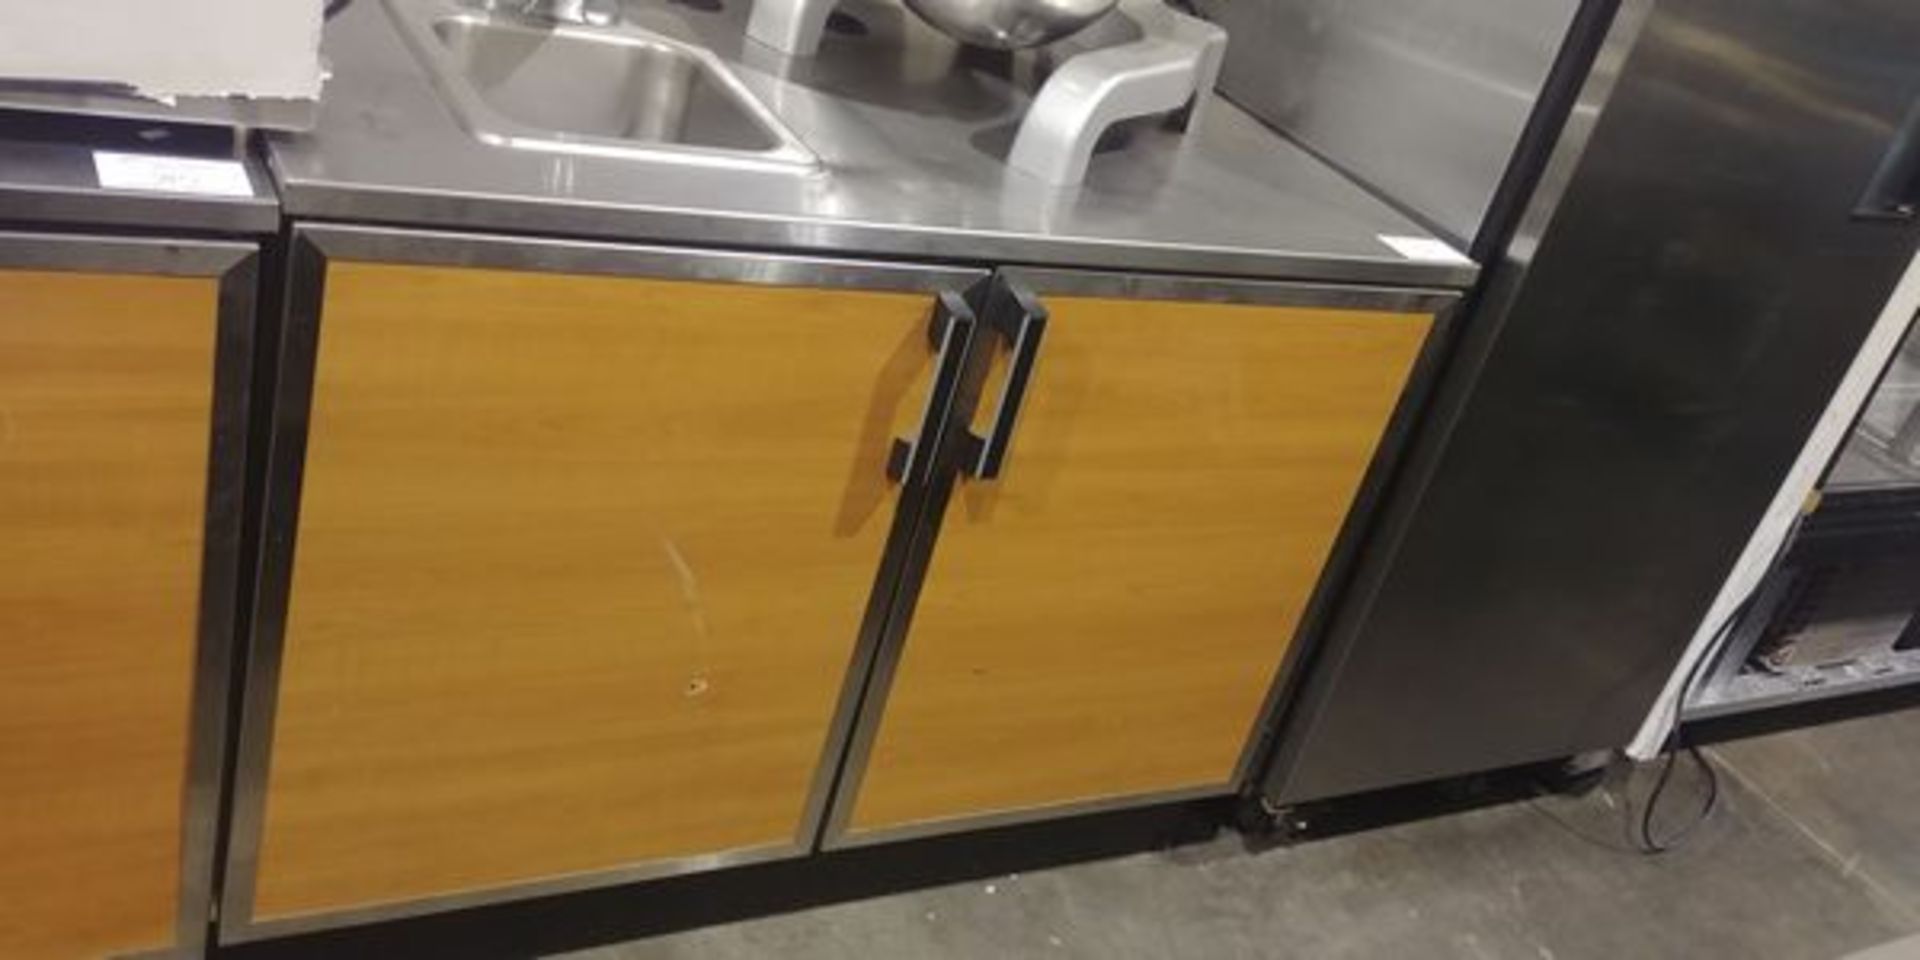 48 x 30" Stainless Steel Cabinet with Door and Stainless Steel Hand Sink